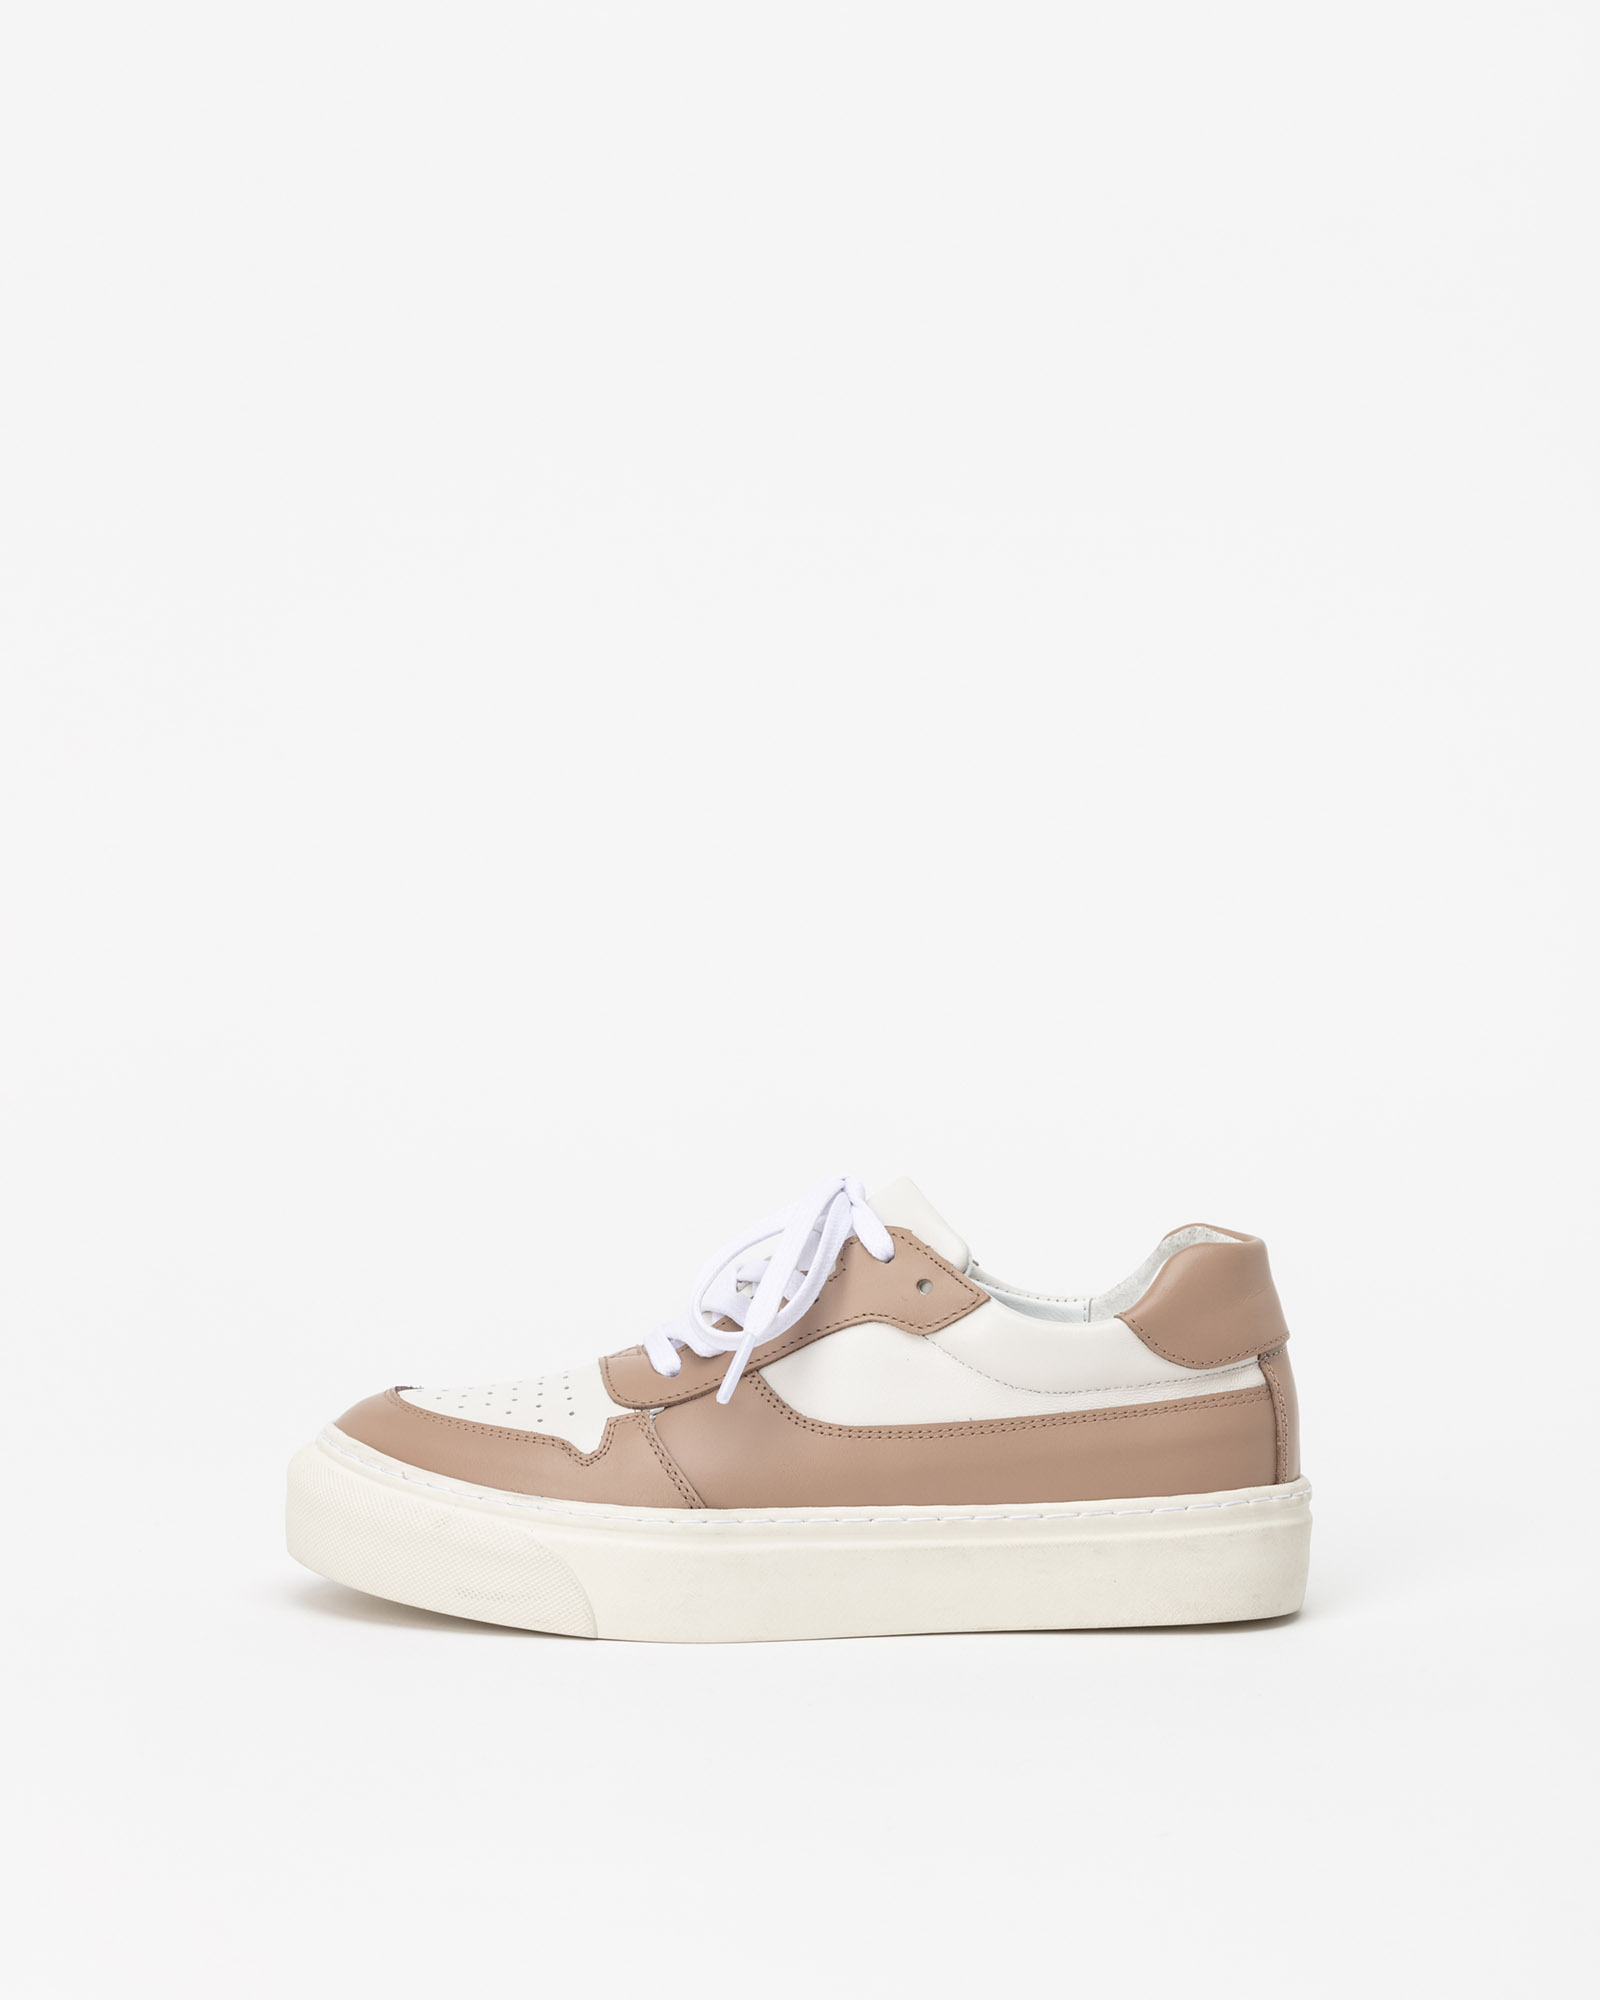 Ardin Sneakers in Lightback Pink with Pure White